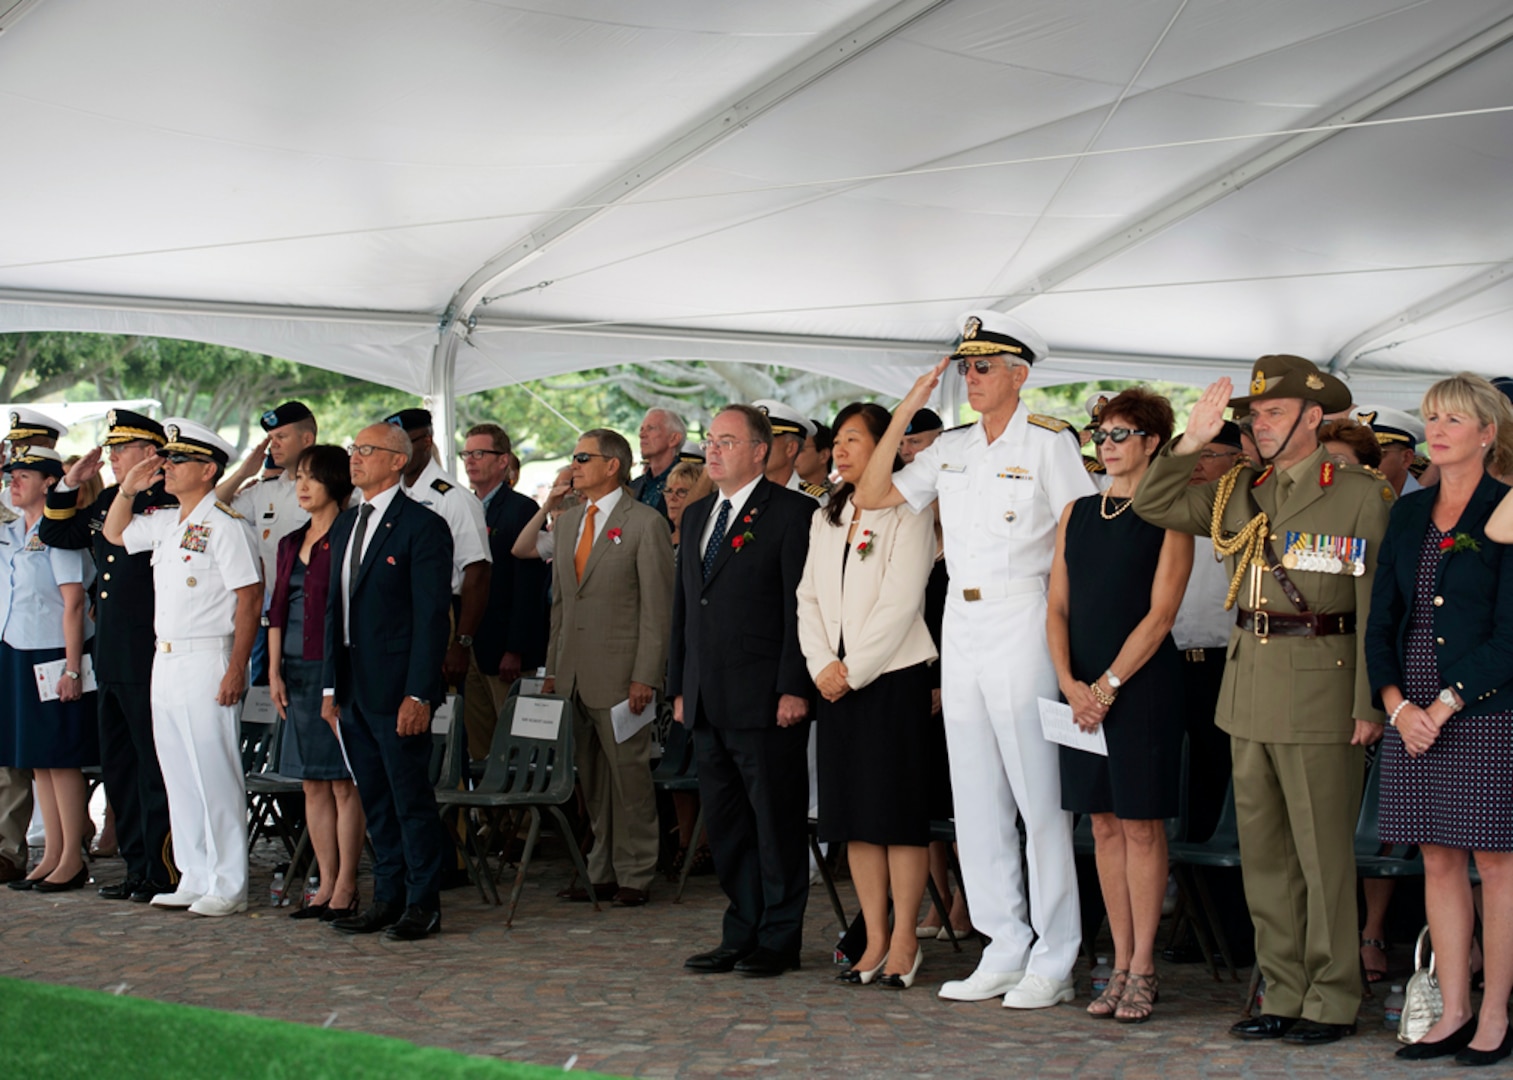 HONOLULU, Hawaii (Apr. 25, 2015) - Commander of U.S. Pacific Command, Adm. Samuel J. Locklear III, attends the ANZAC Day remembrance at the National Memorial Cemetery of the Pacific, Honolulu, to honor and commemorates the soldiers who sacrificed their lives on the Gallipoli Peninsula, Turkey on April 25, 1915.  This year marks the centenary of the Australia and New Zealand forces landed on Gallipoli Peninsula during World War I. 150424-N-DX698-127